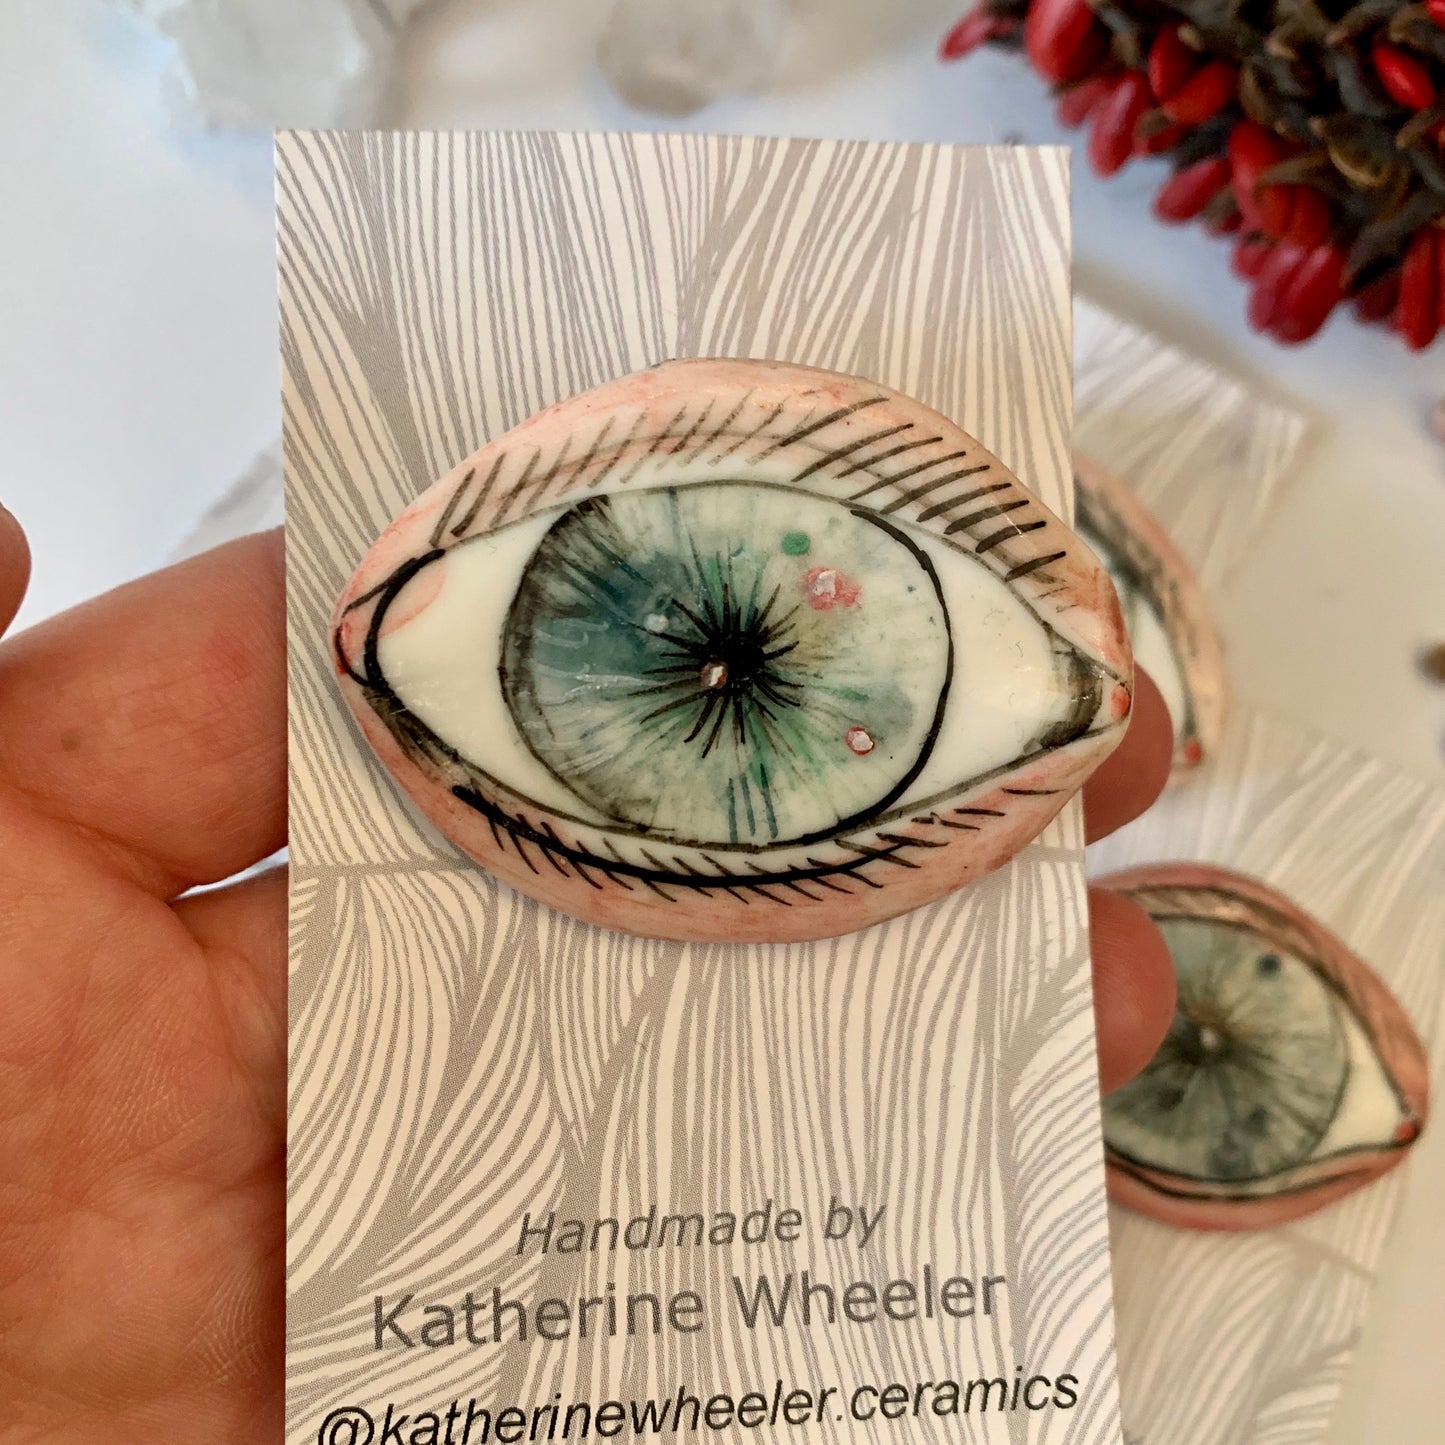 ‘The protective eye’ handpainted porcelain brooch, choose one